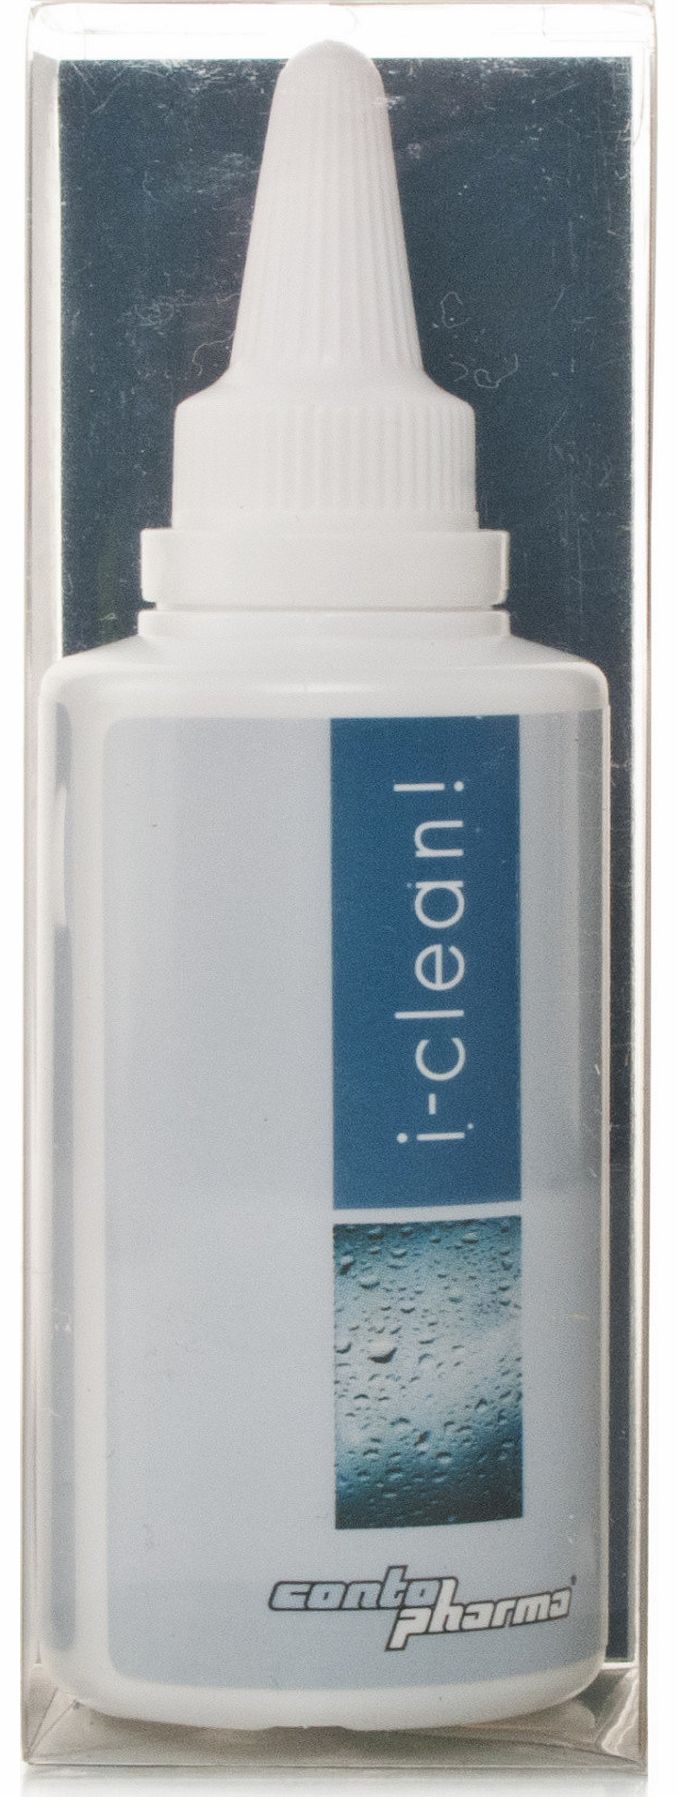 i-clean Daily Cleaner is the ideal non-abrasive daily cleaning solution for both RGP and soft contact lenses.The aqueous-alcoholic surfactant system in i-clean is the optimal formula for removing protein deposits from cell membranes adhering to the s